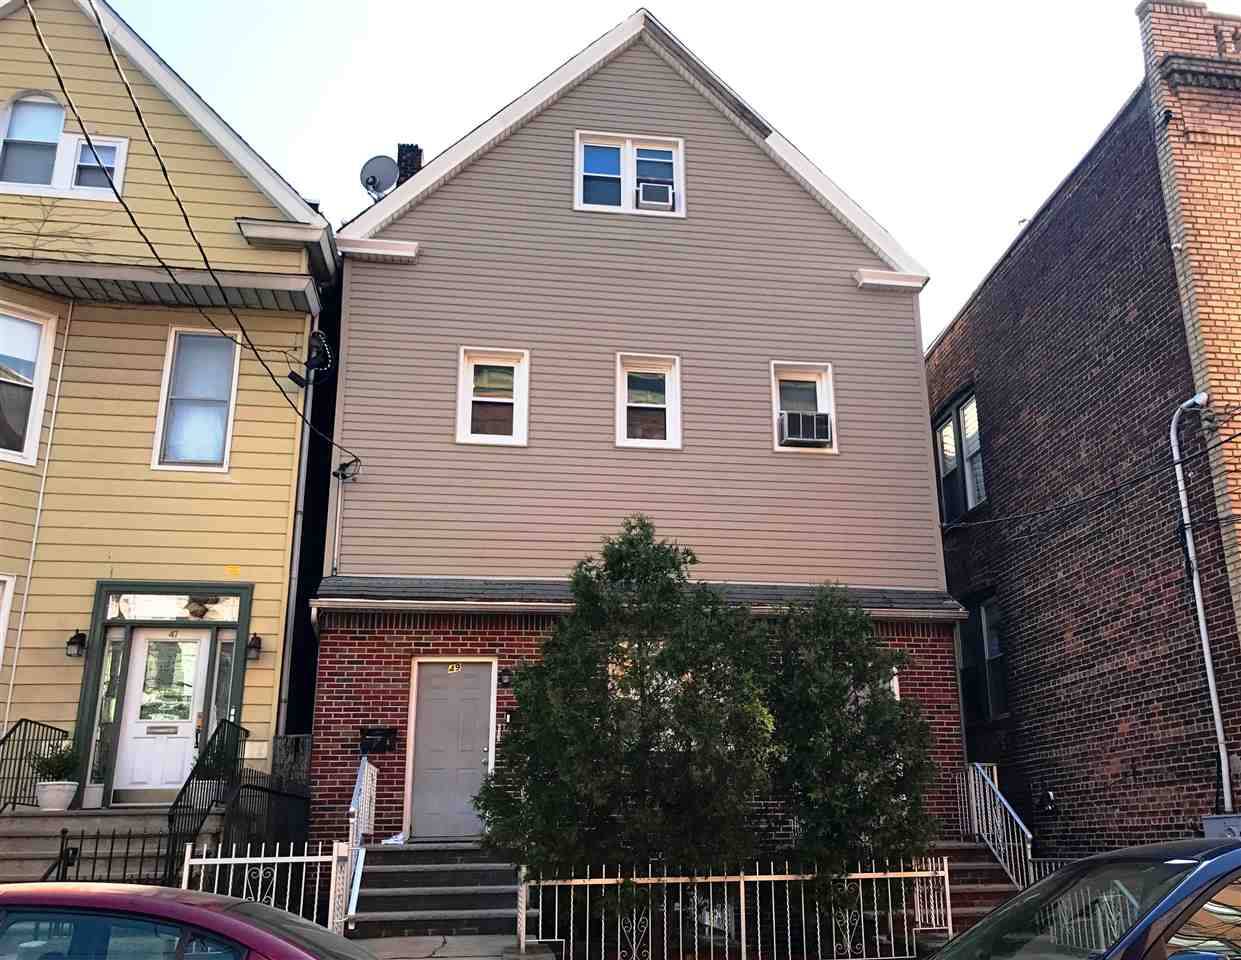 Atop a 25' x 98' lot sits a Weehawken Wonder - Multi-Family New Jersey